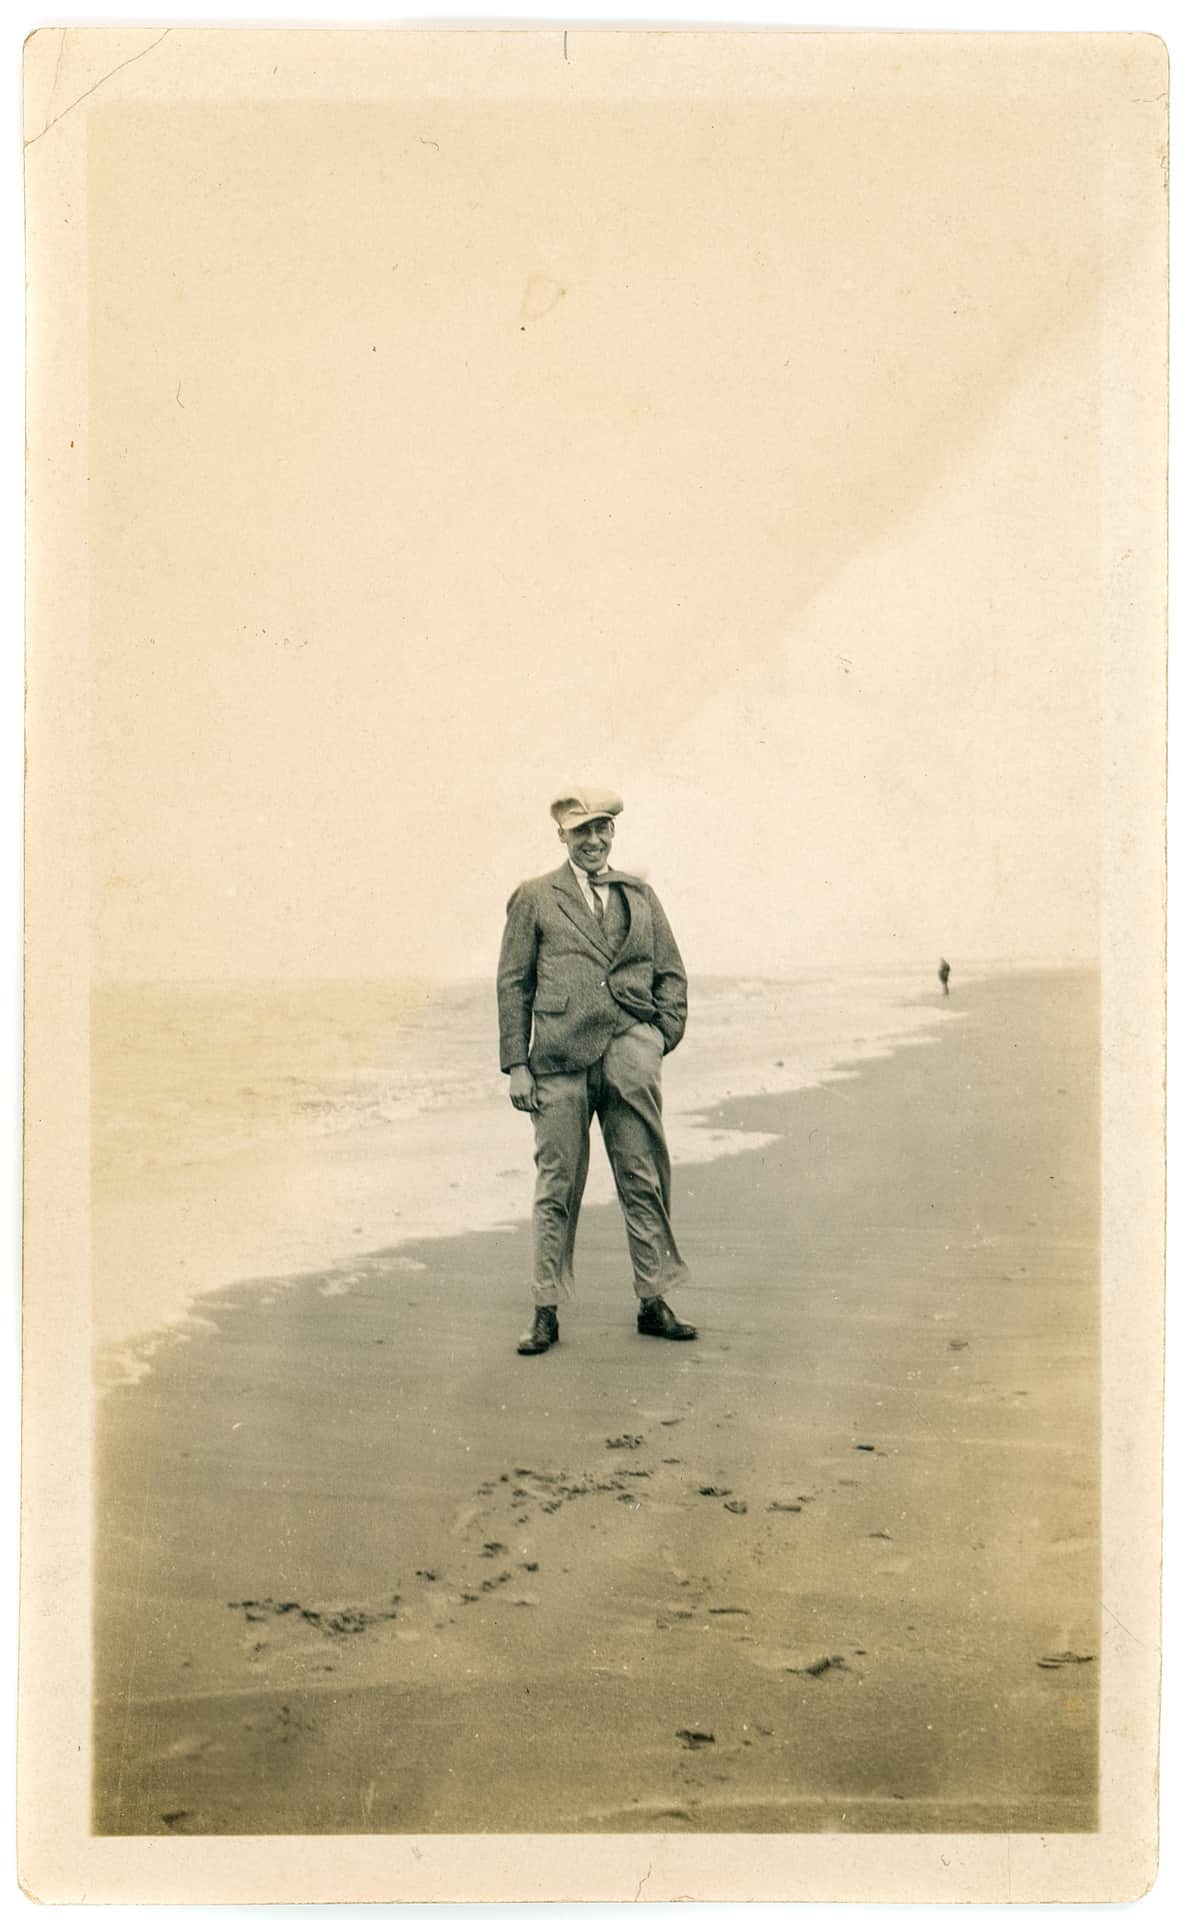 My Father on the beach, proabably taken by my mother on the Box Brownie. 